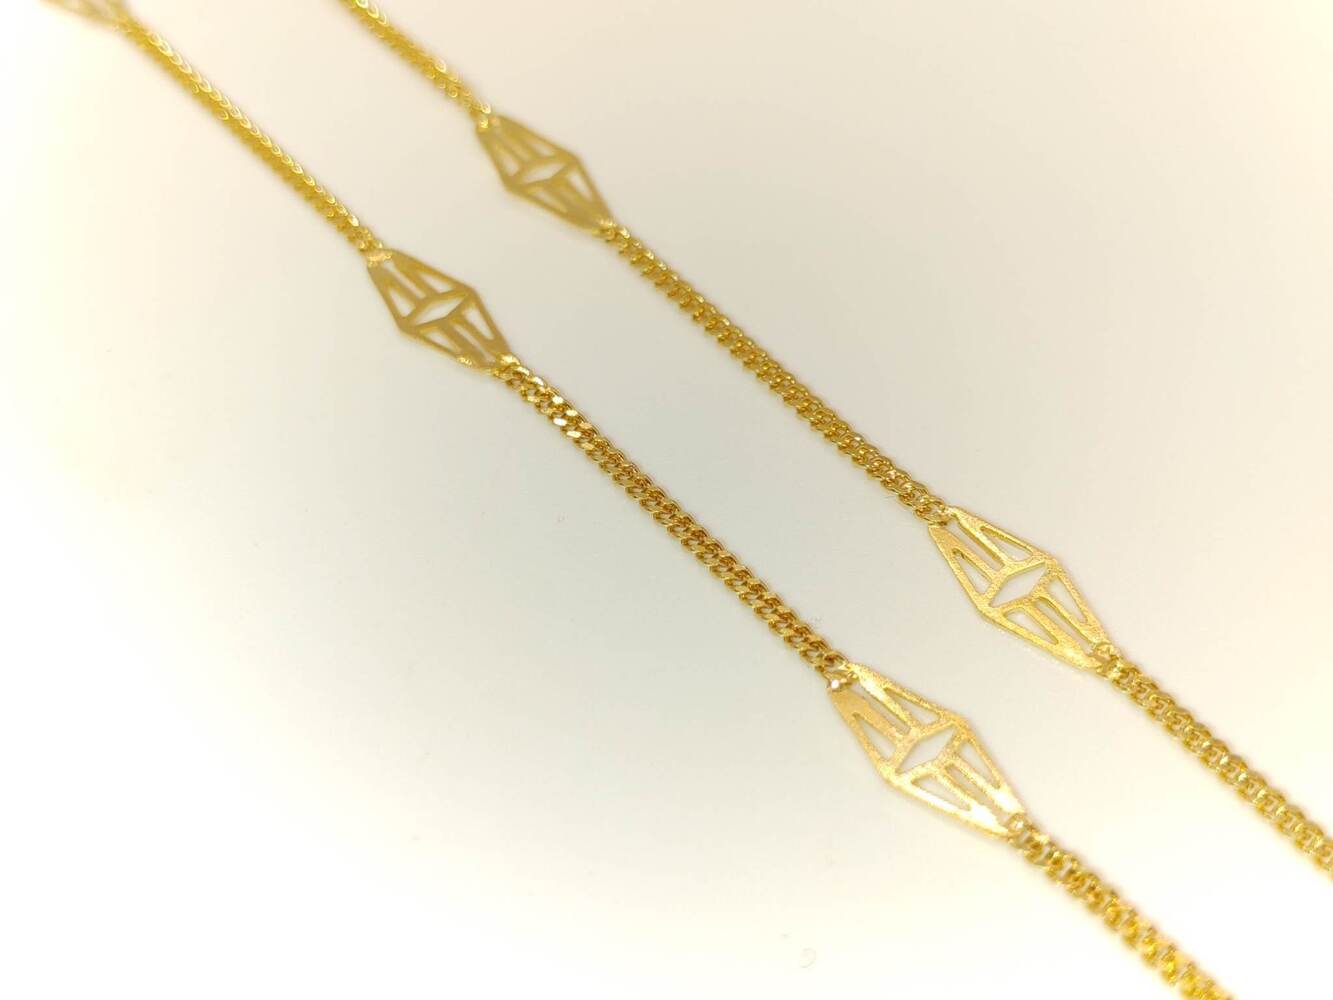 18 Karat Yellow Gold Curb Chain with Triangle Decorative Links